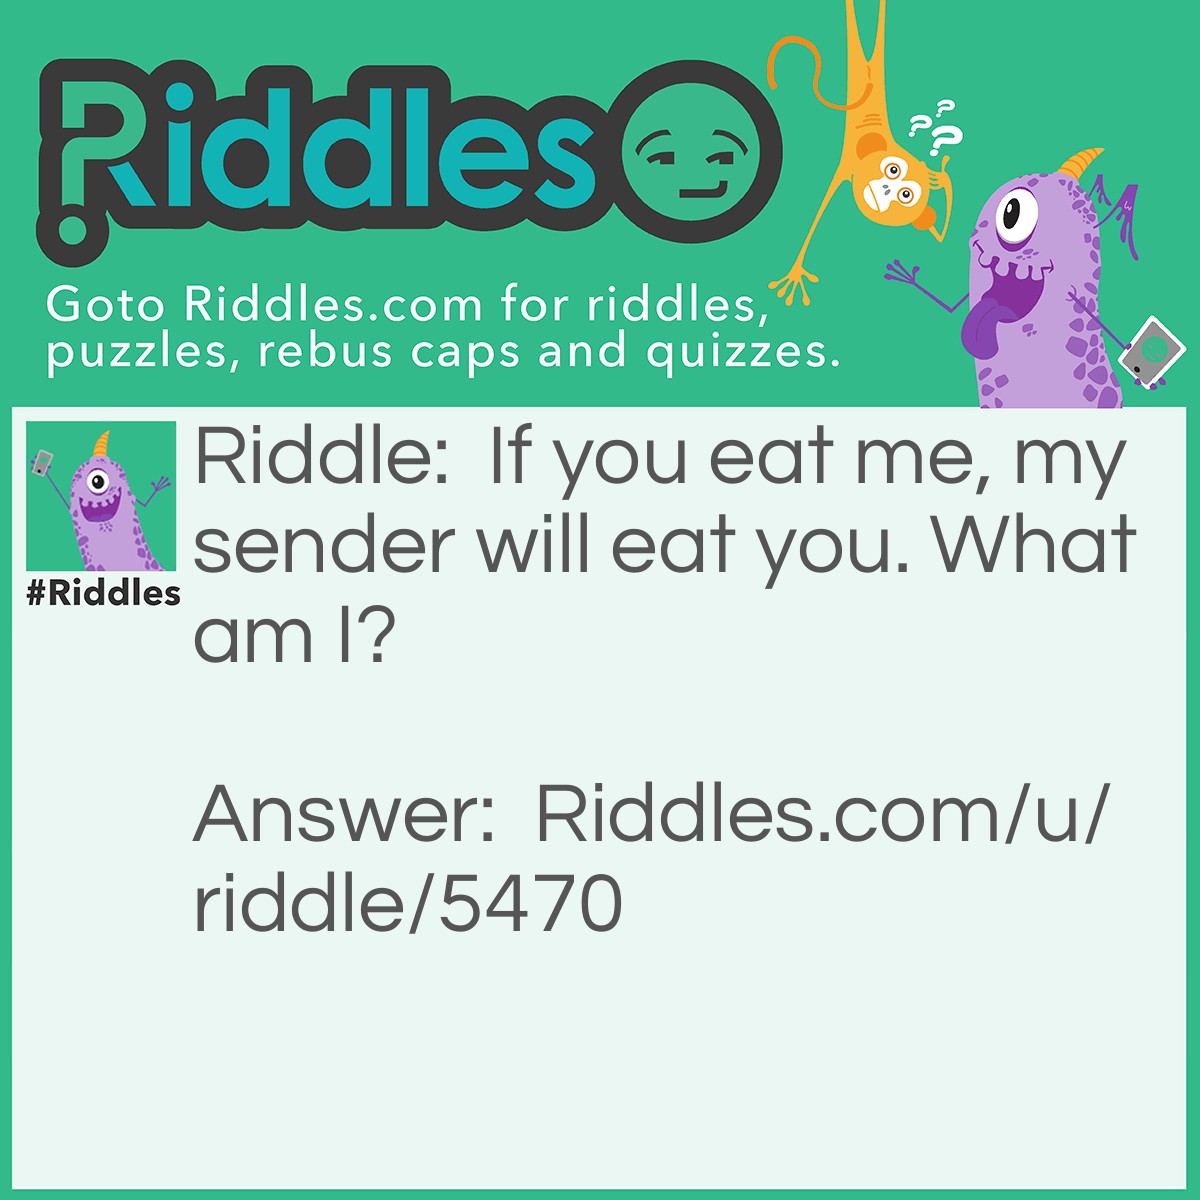 Riddle: If you eat me, my sender will eat you. What am I? Answer: A Fish Hook.